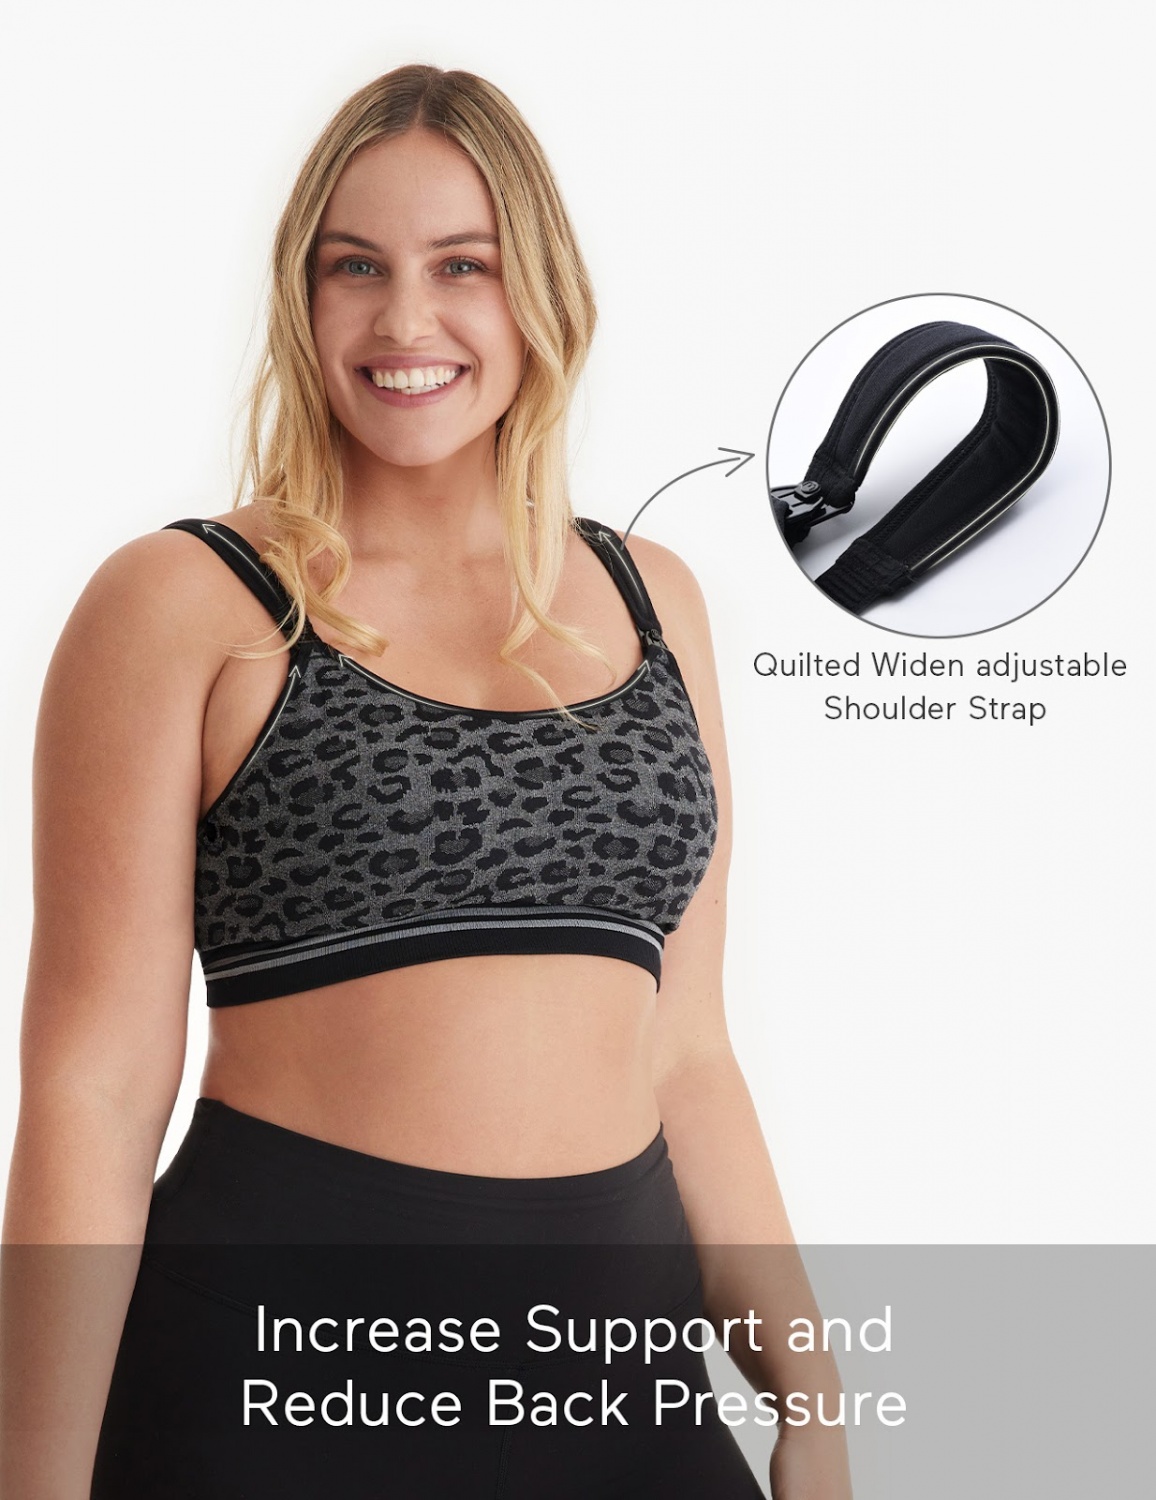 Momcozy Seamless Pumping Bra Hands Free, Comfort and Great Support